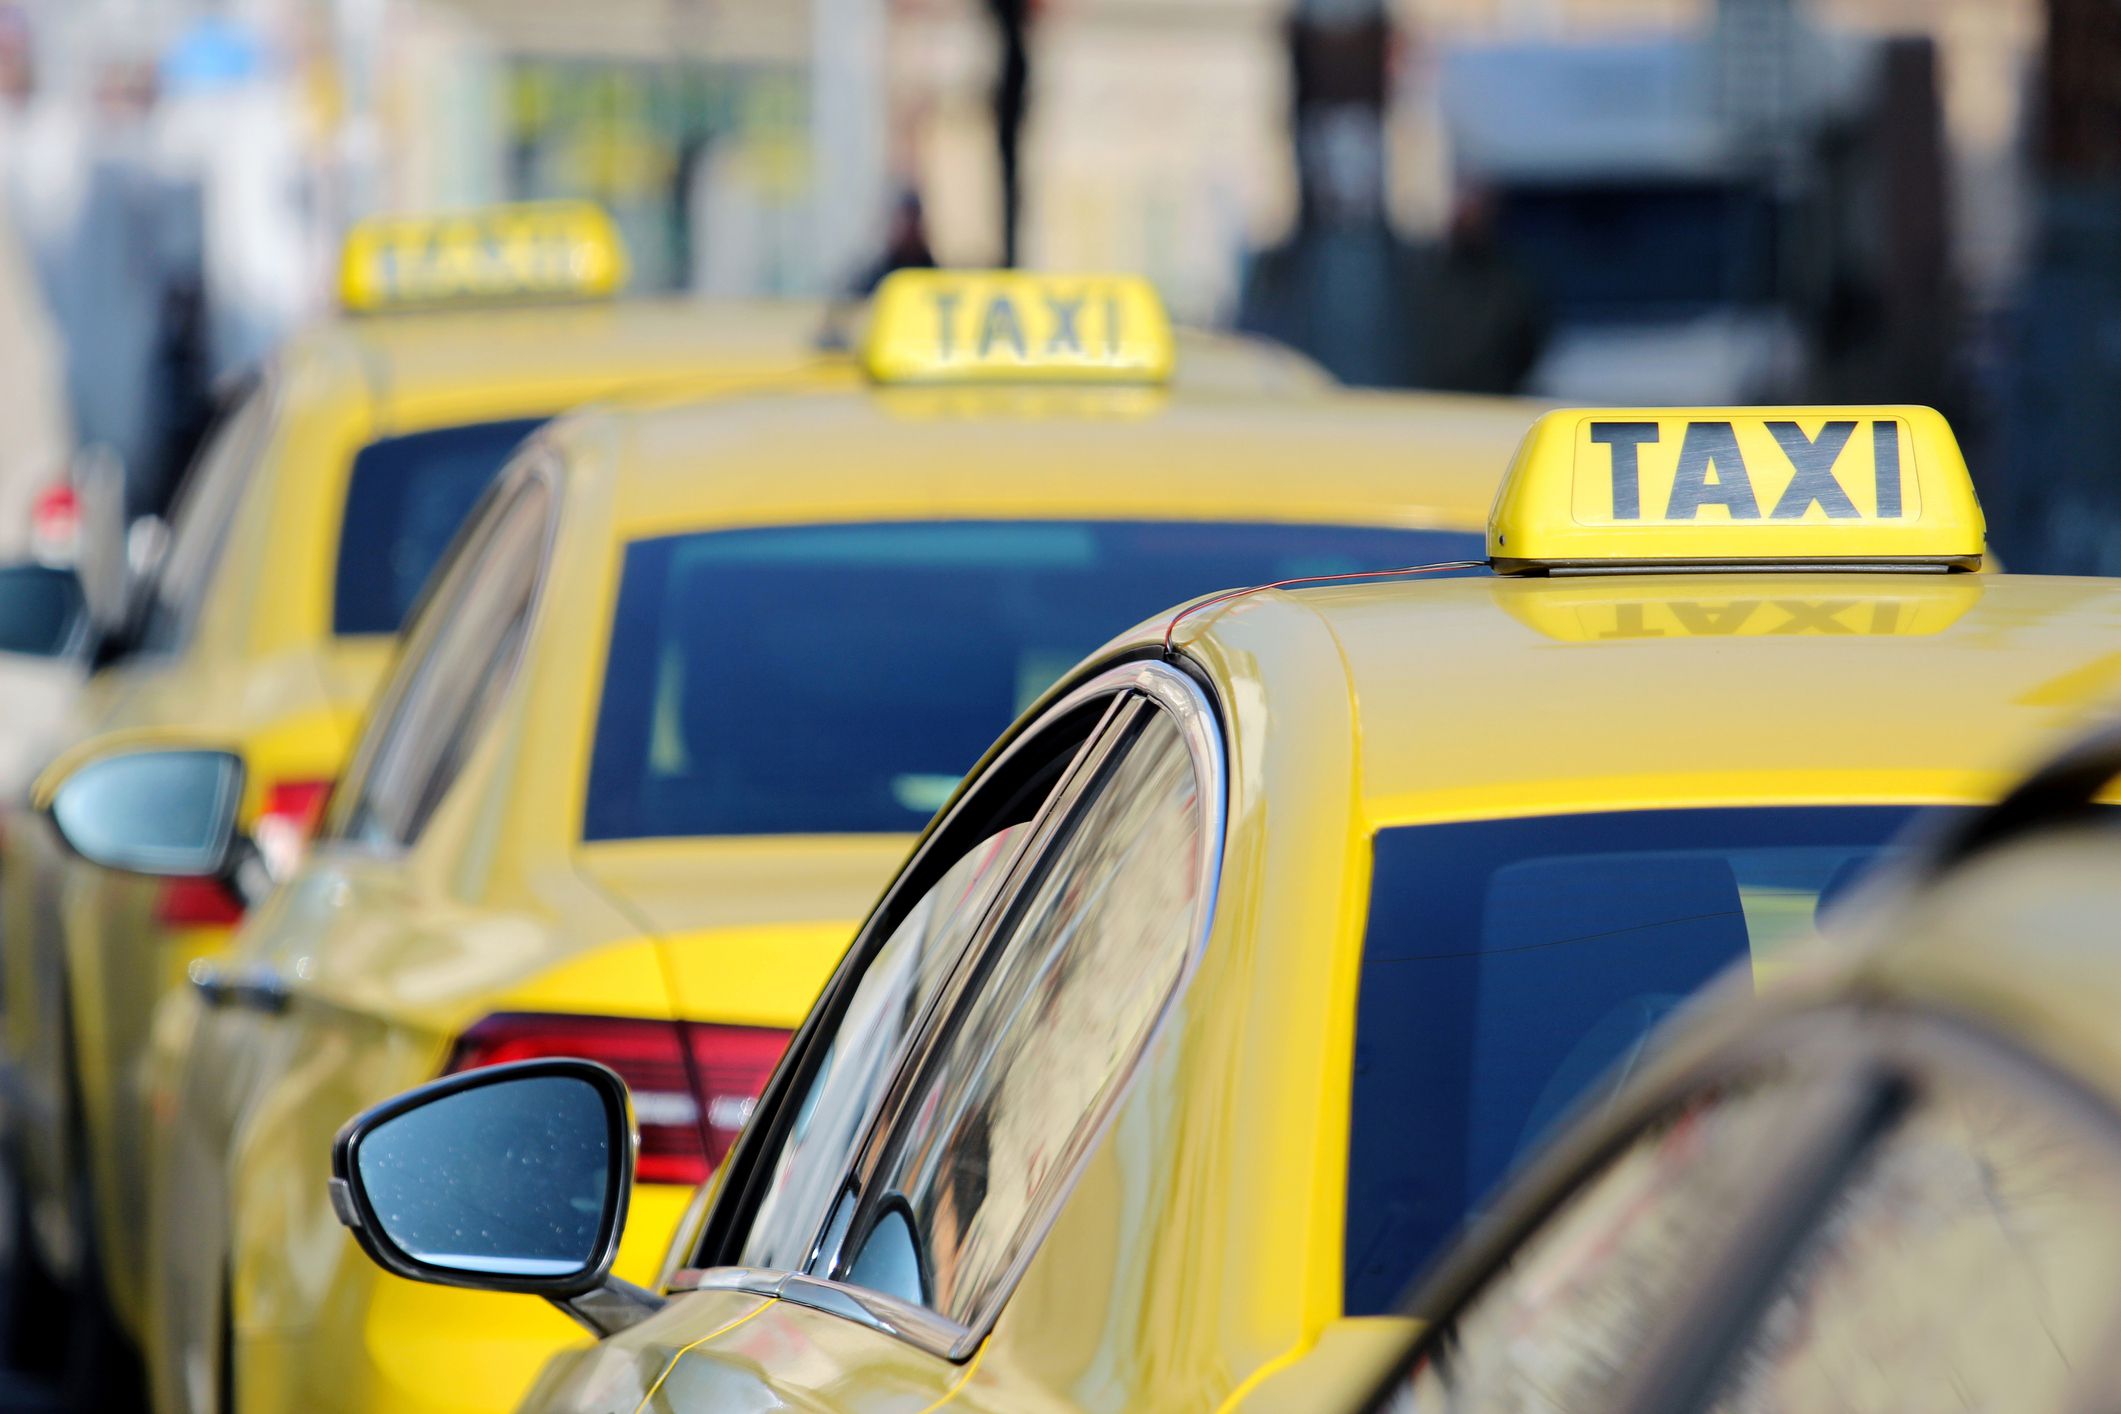 <p>Drivers help in a few different travel scenarios. If you’re taking a taxi or rideshare, consider tipping either $4 to $5 for short rides and 10% to 20% for long rides. Add an extra tip if the driver helps with your luggage. It’s also customary to tip shuttle drivers, typically from $1 to $5 depending on the size of your party.</p>